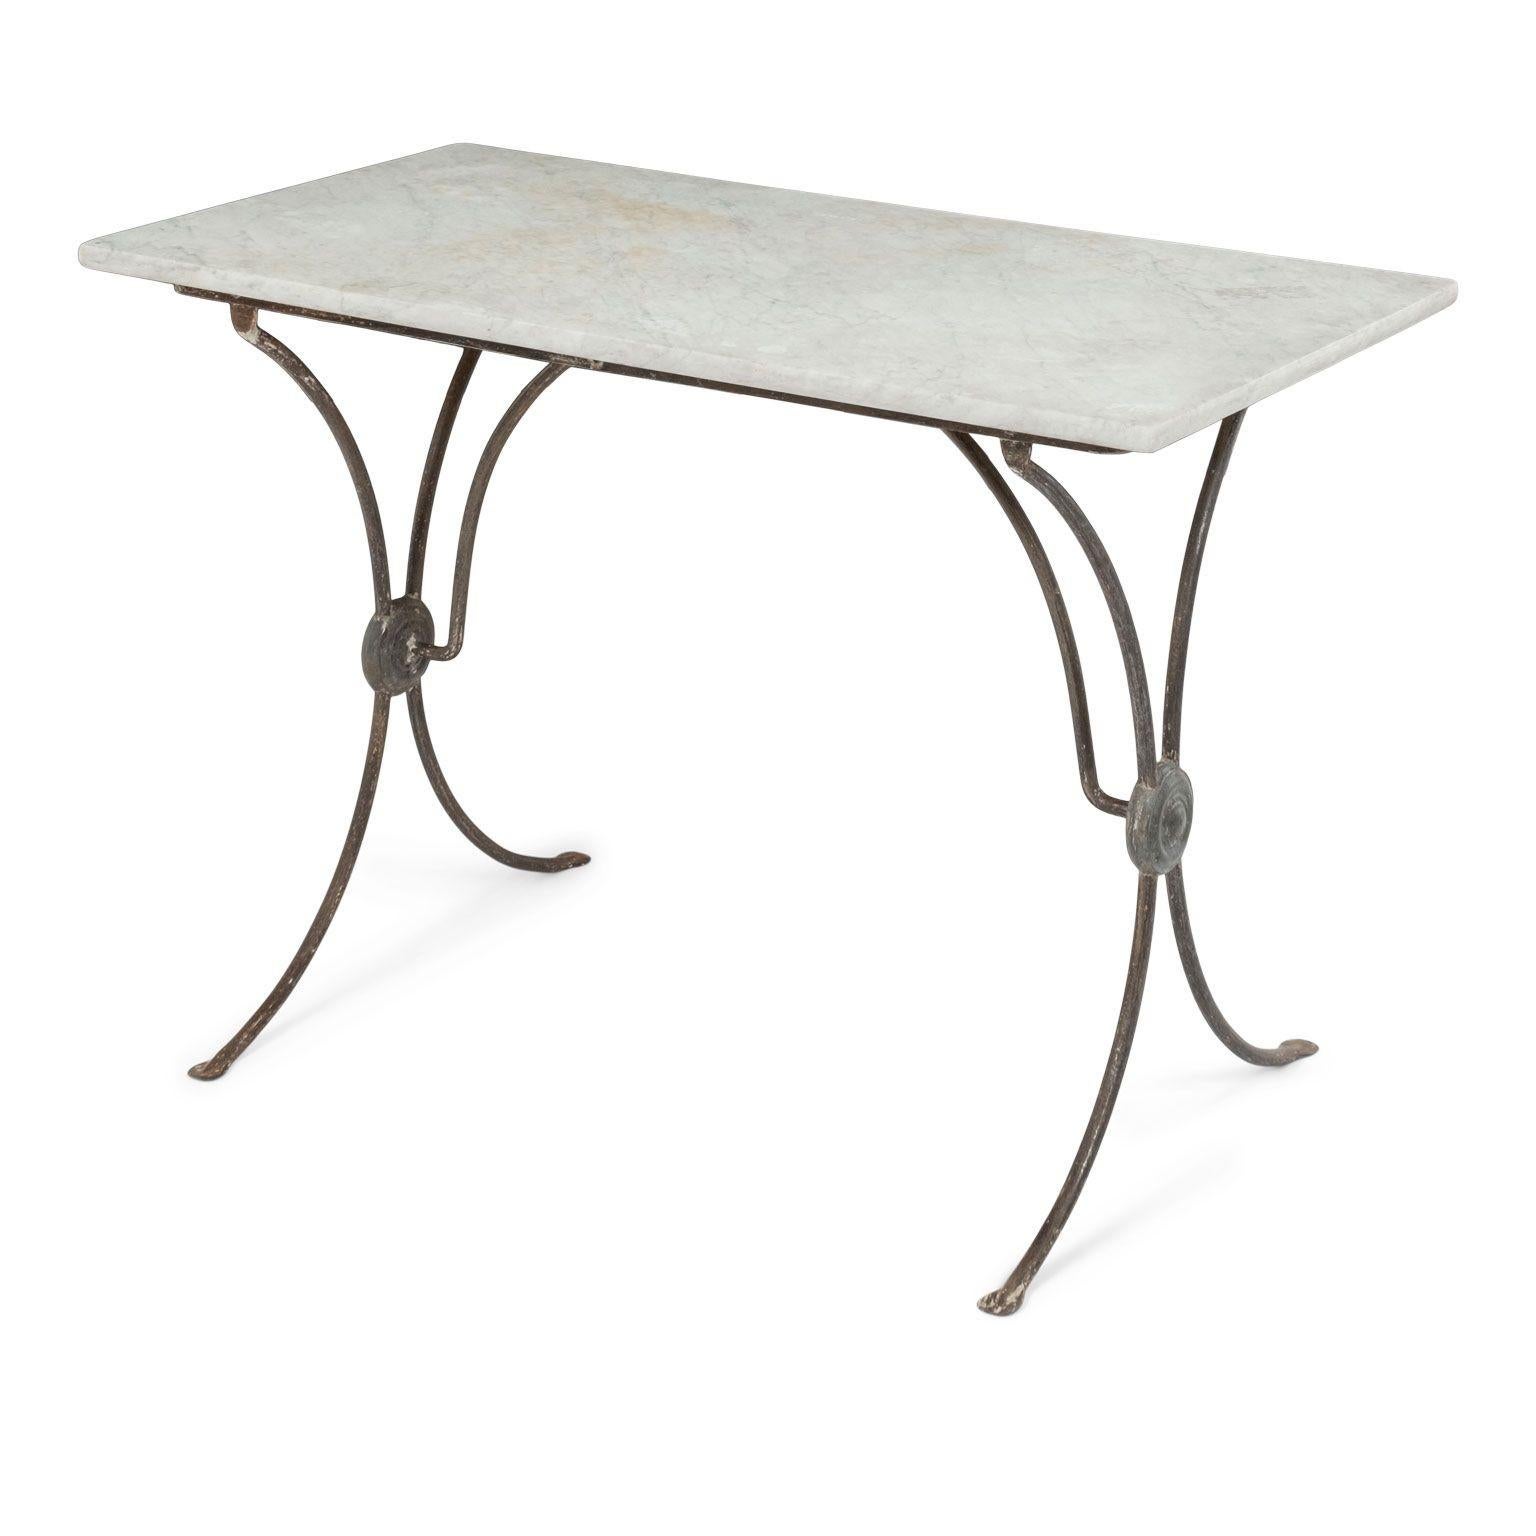 Carrara marble top French iron garden table dating to late 19th century. Forged wrought iron splayed-legged base with faint remnants of old paint.